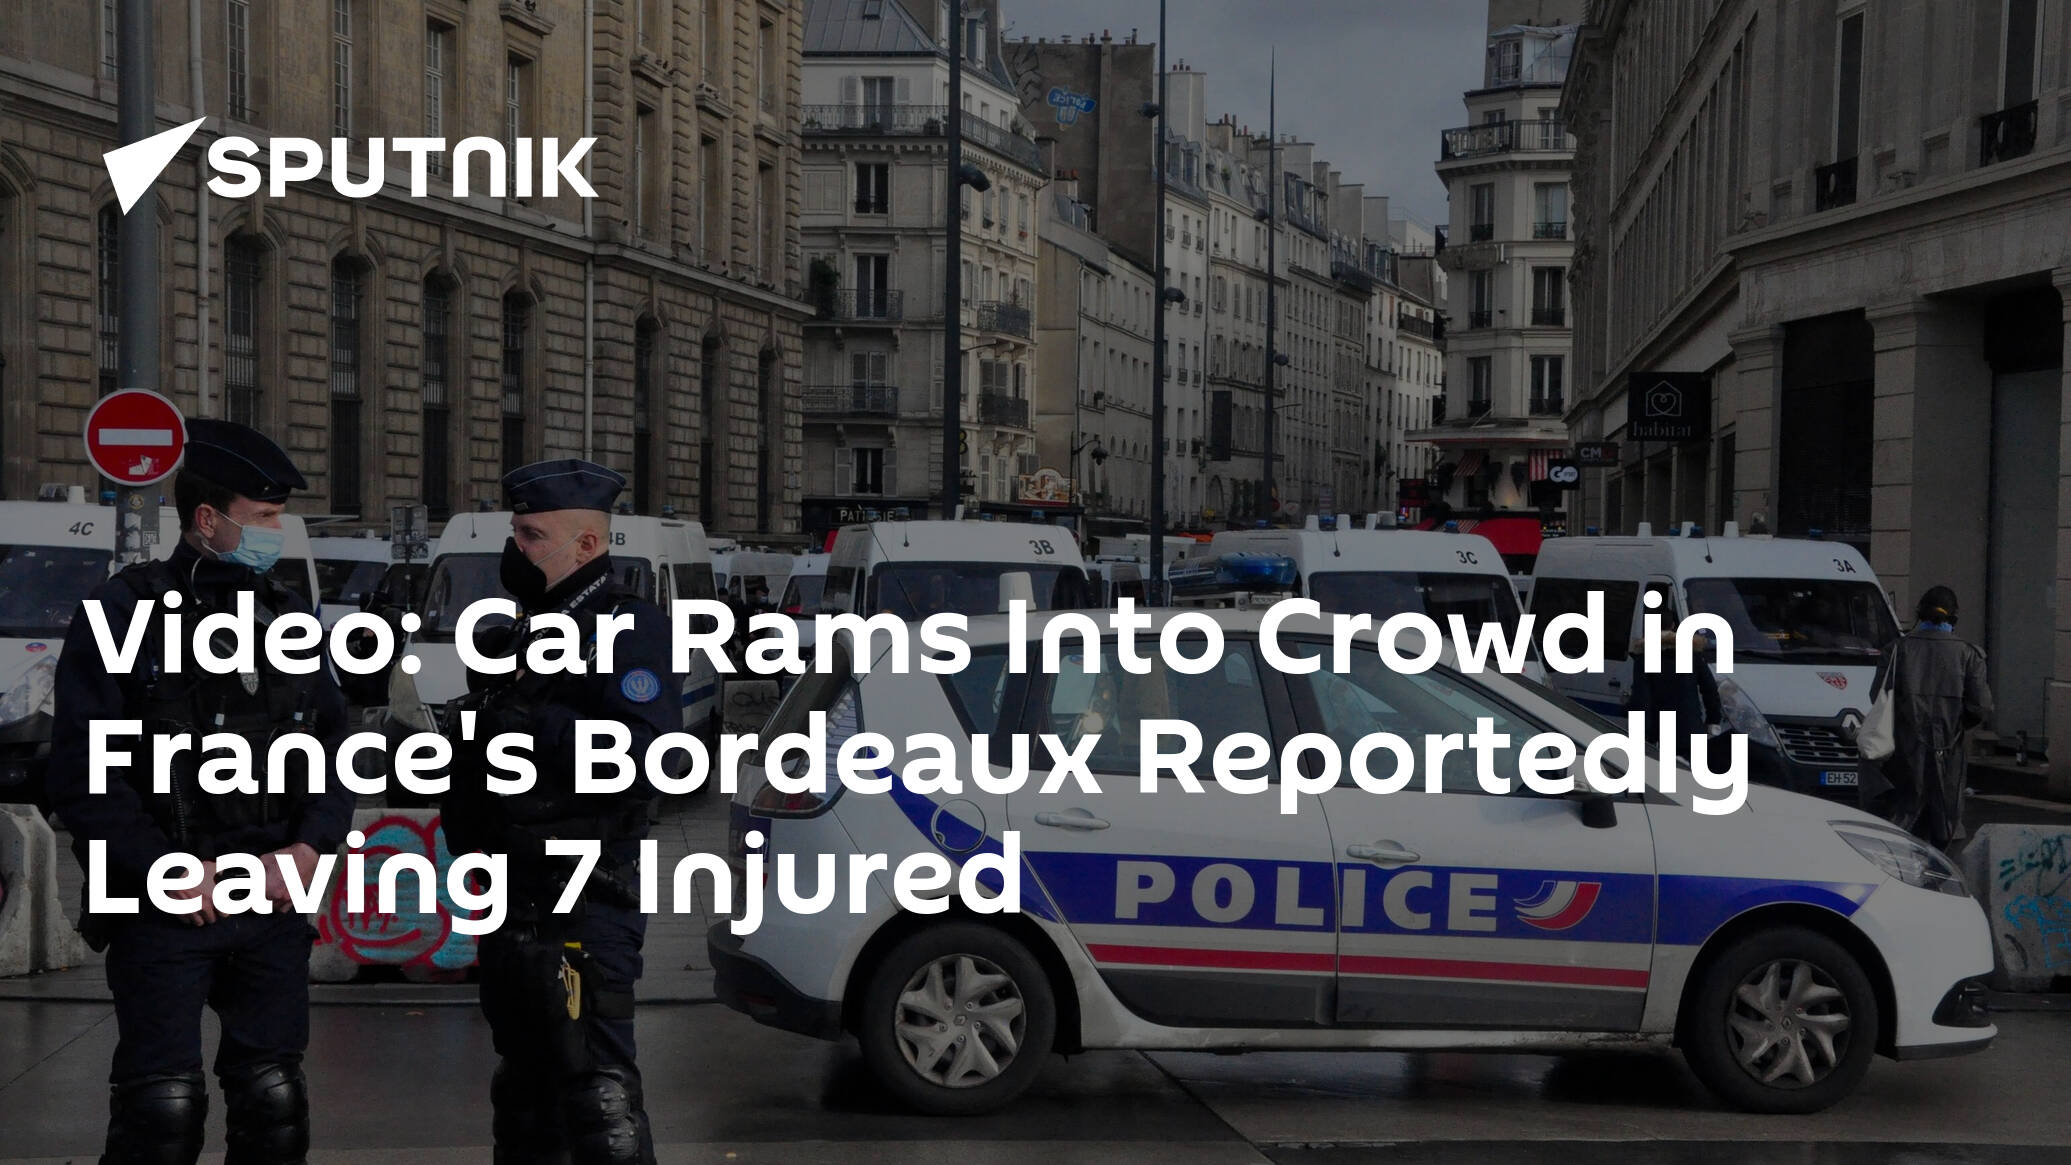 Video: Car Rams Into Crowd in France's Bordeaux Reportedly Leaving 7 Injured